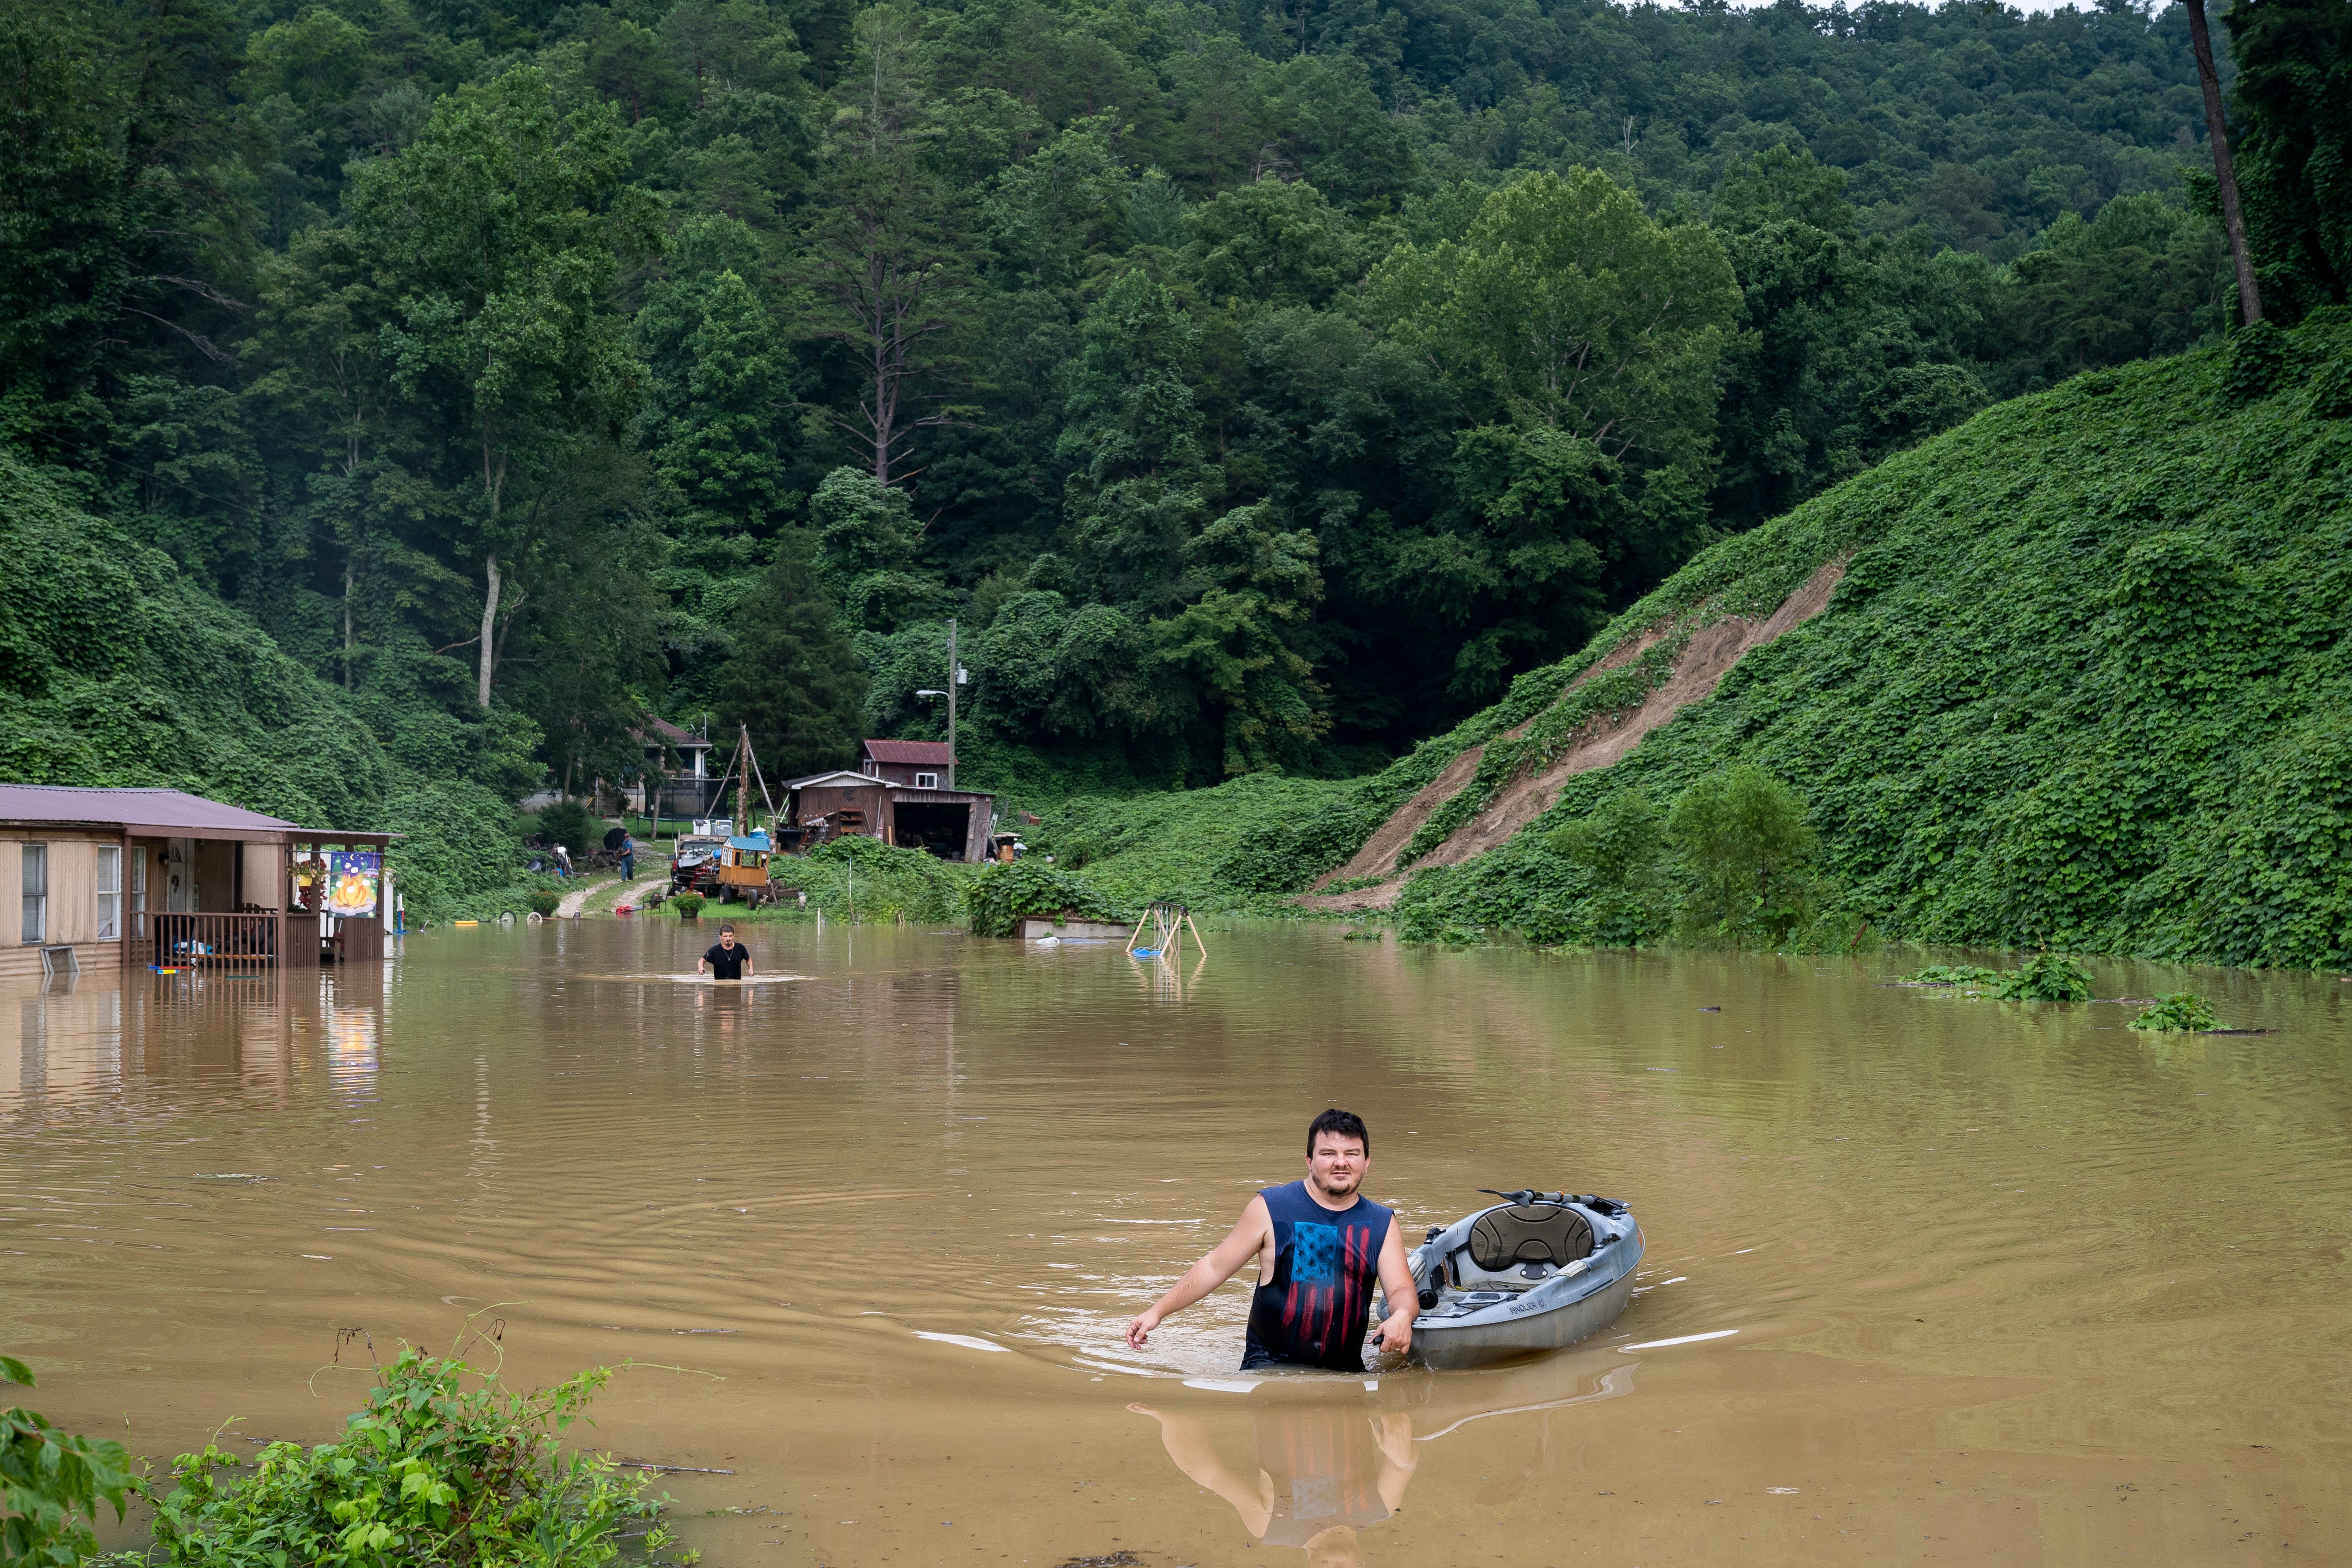  Lewis Ritchie tows a kayak outside of Jackson. (Photo: Michael Swensen, Getty Images)